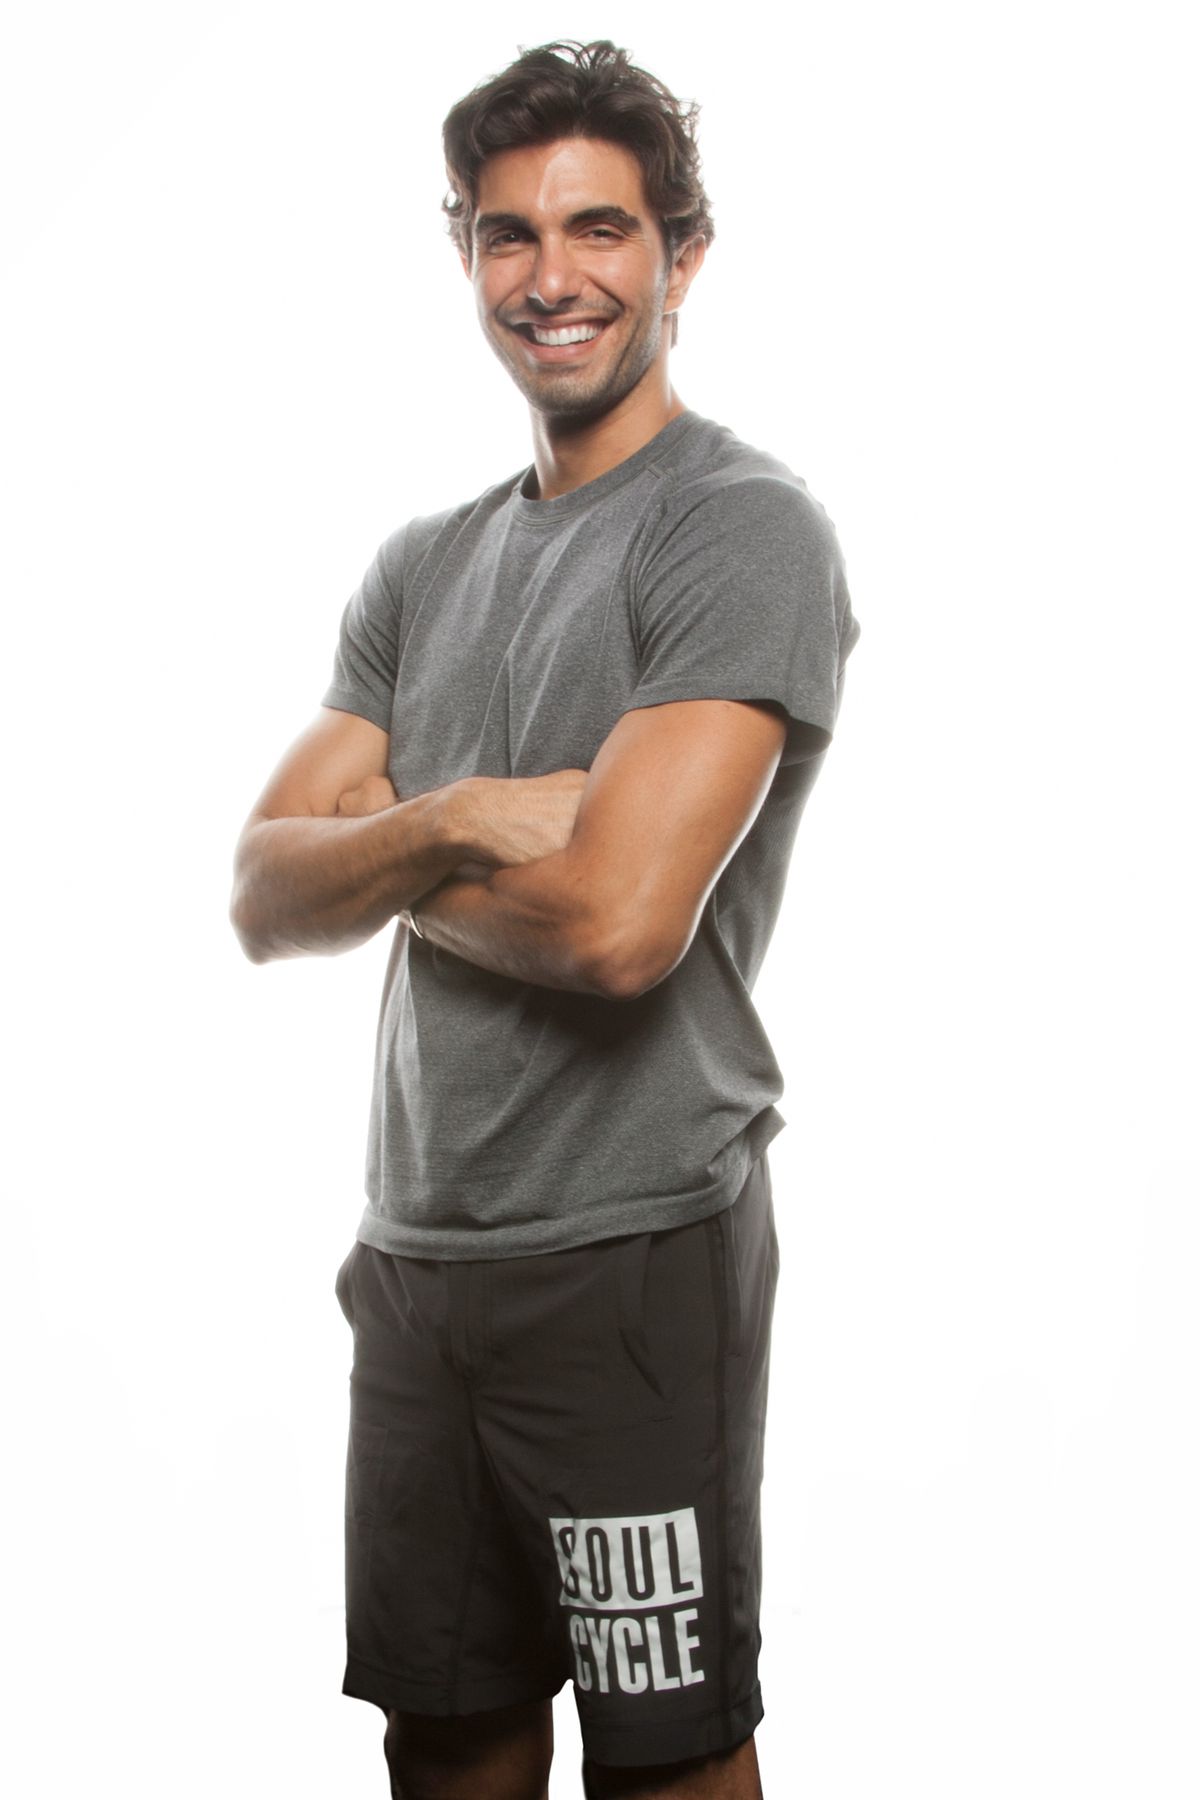 NYC's Hottest Trainer 2015 Contestant #9: Akin Akman, Soulcycle